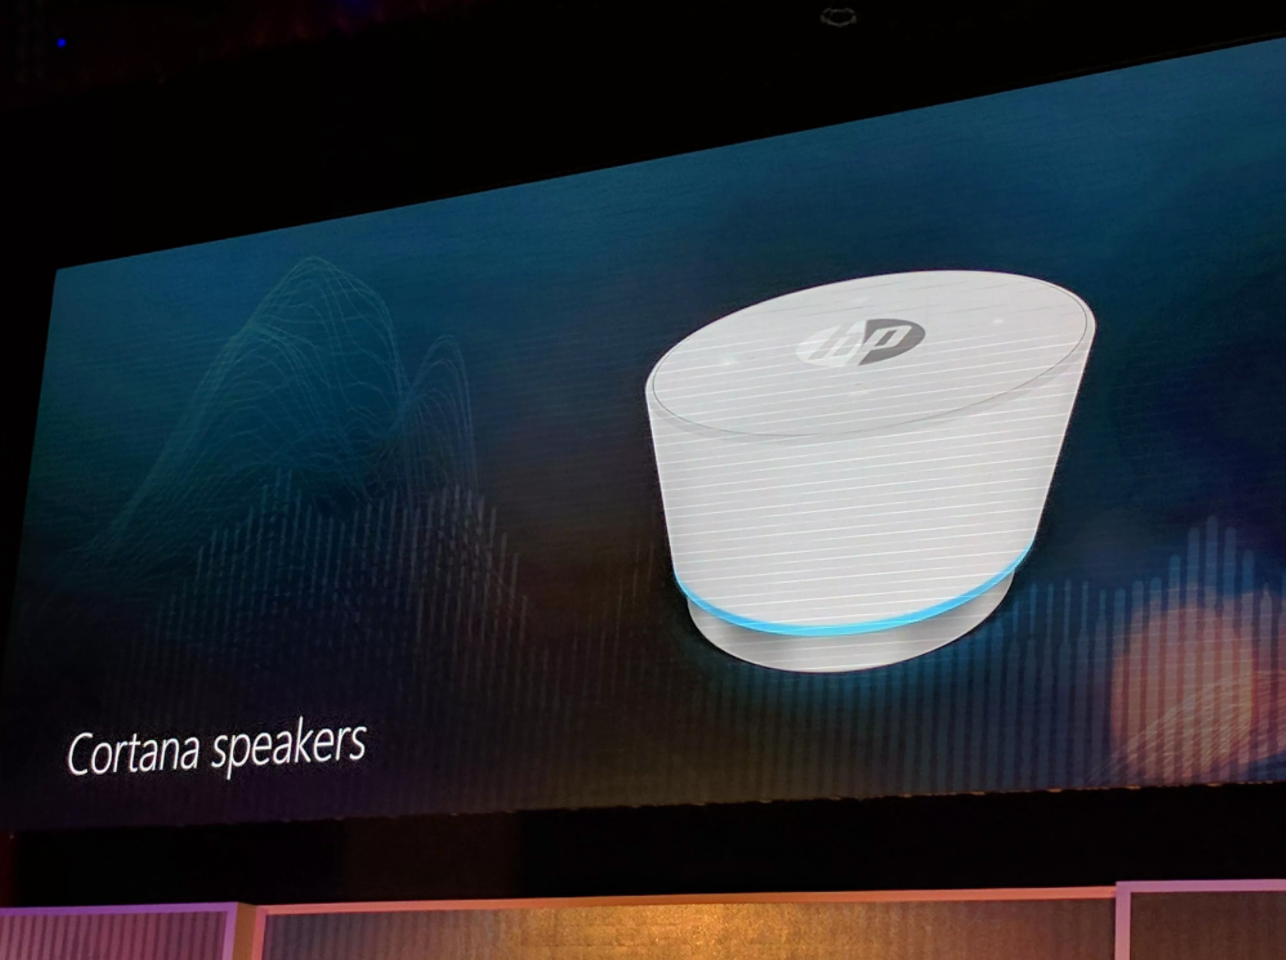 hp s cortana device will be a standalone speaker with ai built in image 1